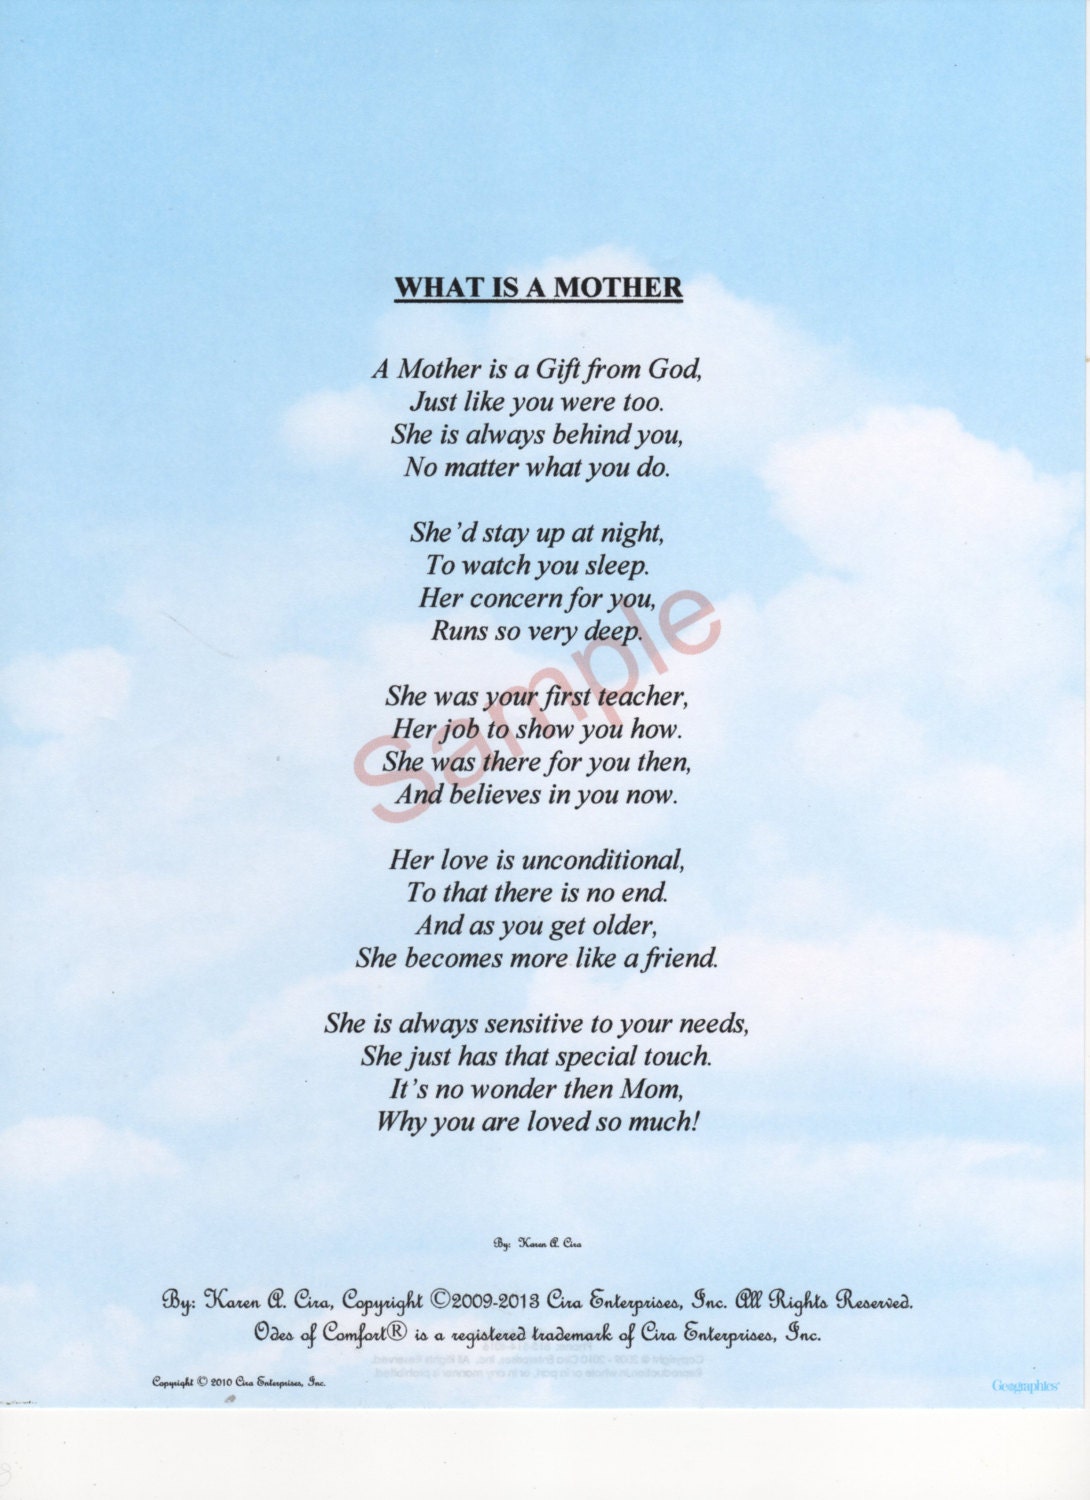 Five Stanza What Is A Mother Poem shown on